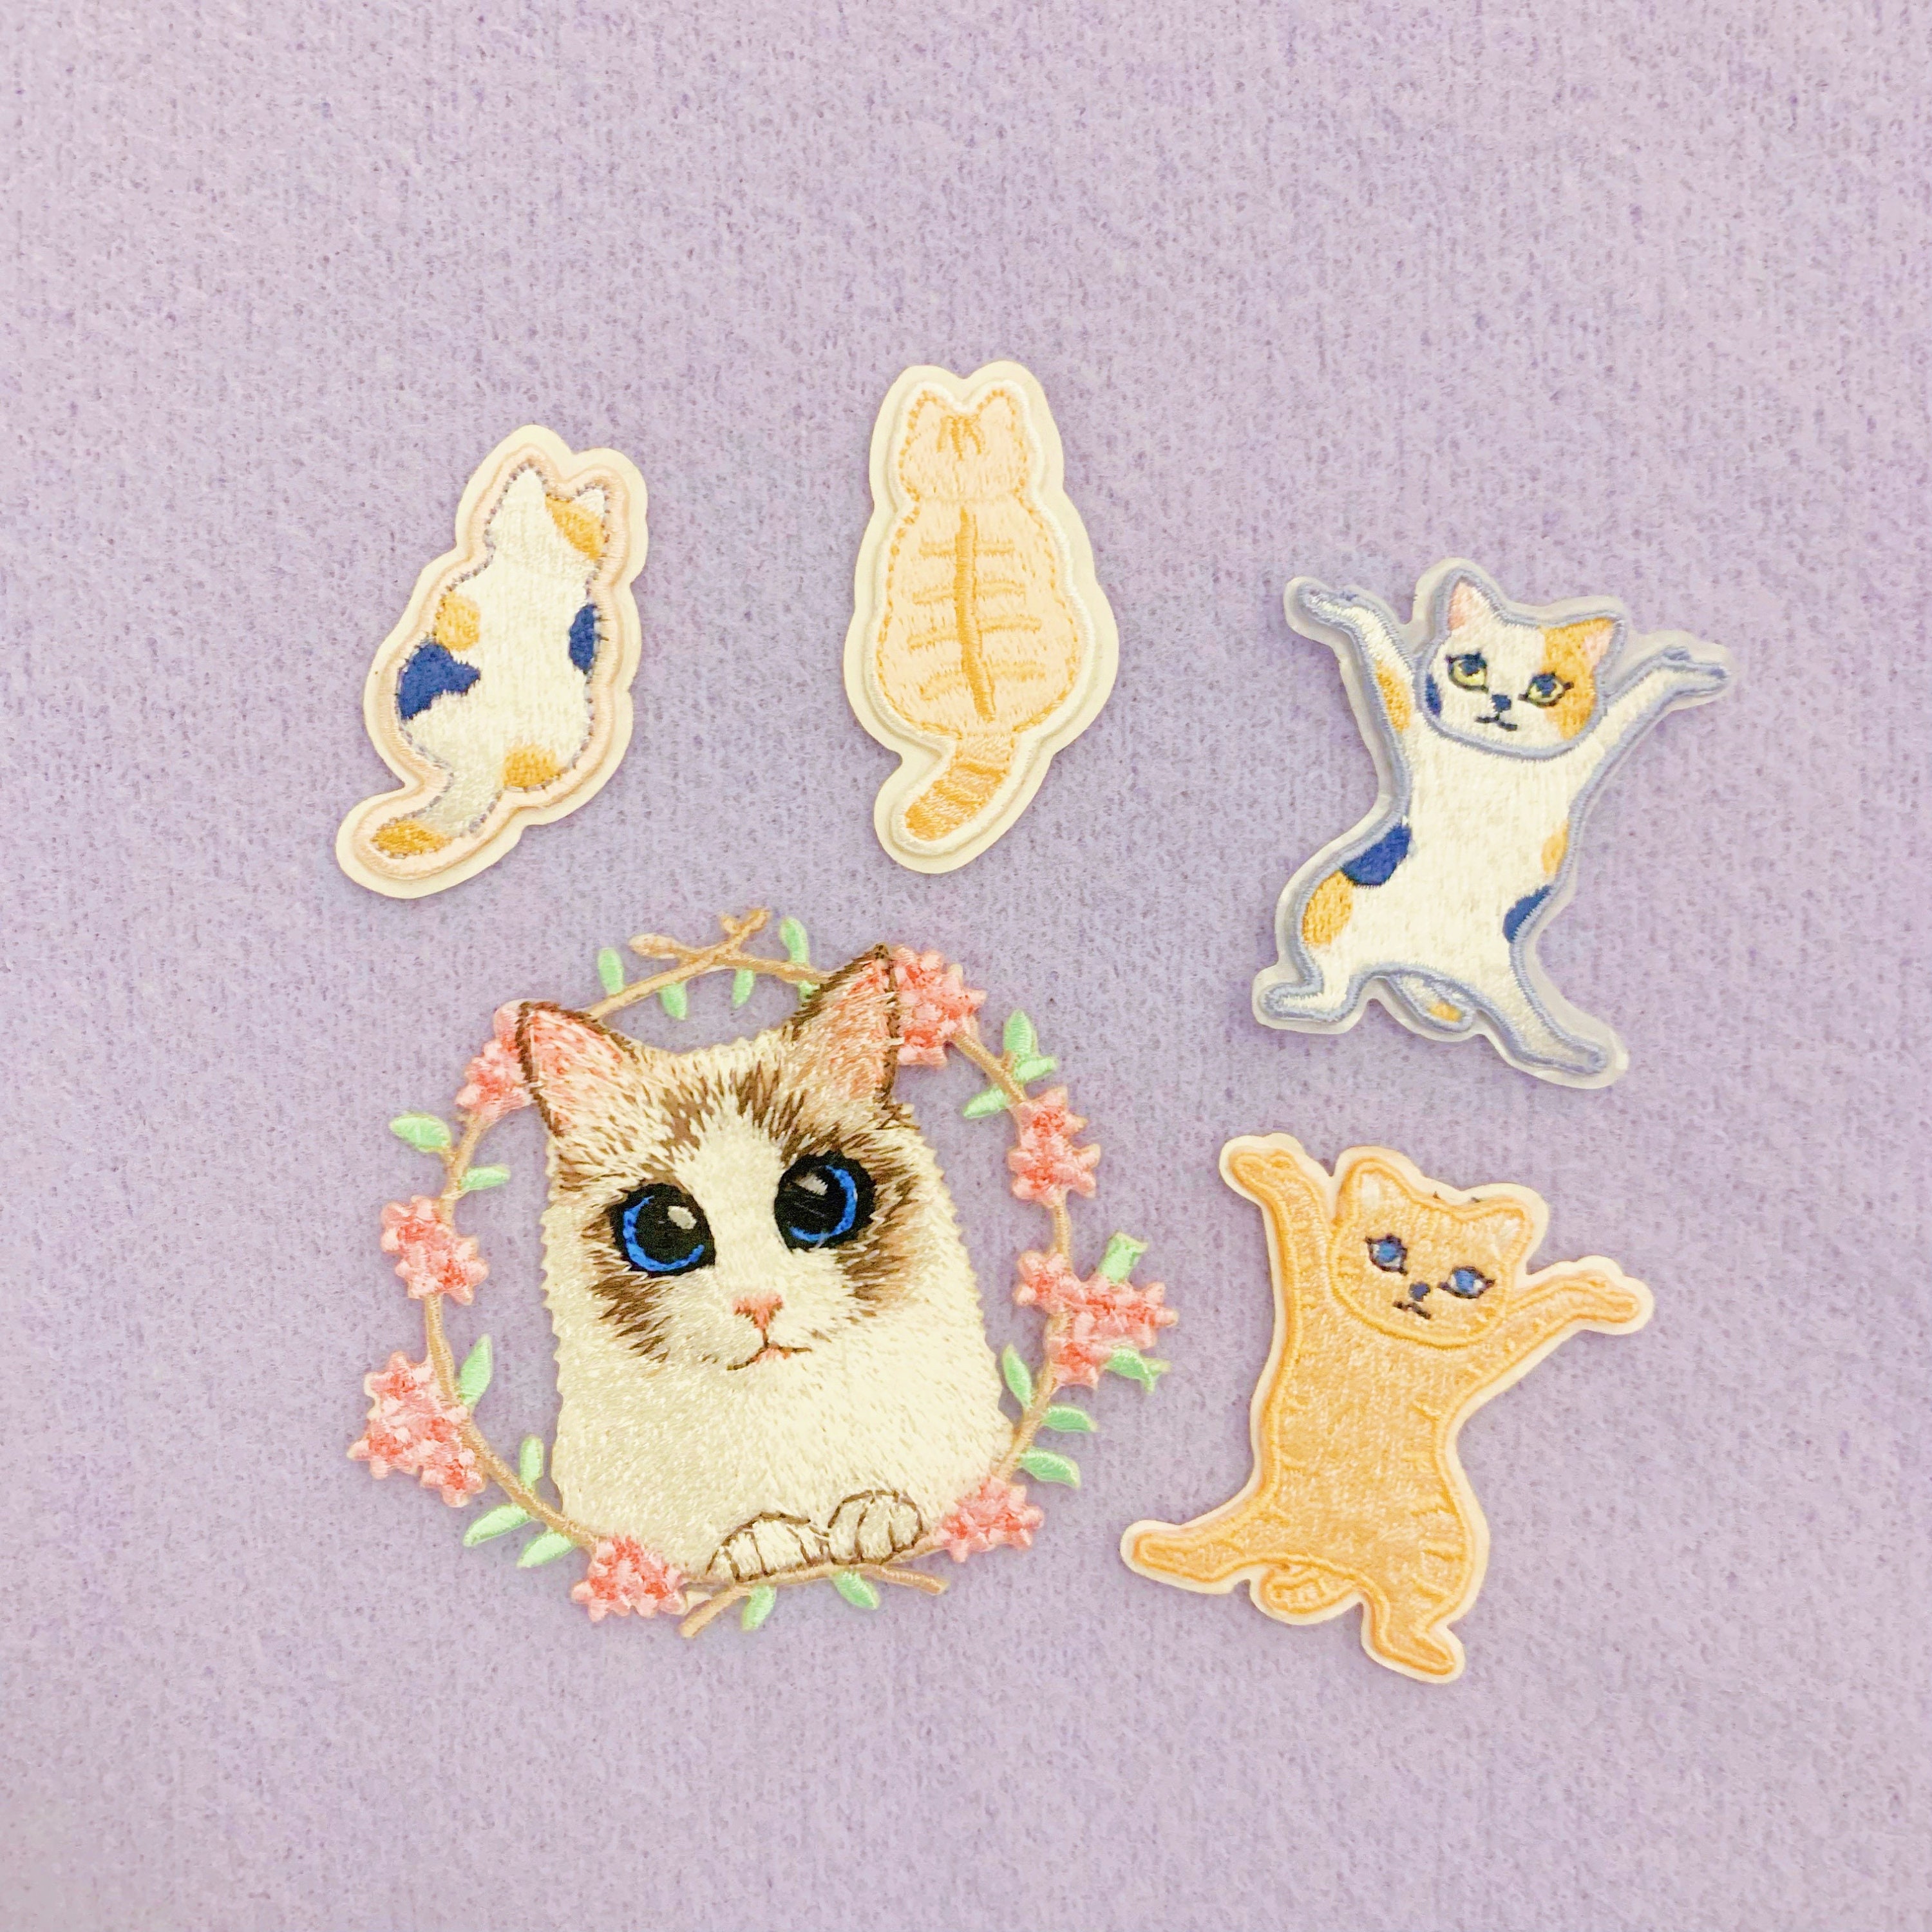 Calico Cat Iron on Patch for Clothes, Backpacks, Hats, Bags, Etc Adorable  Clothing Accessory, Cute Kitty Embroidery, Kawaii Sew on Badge 